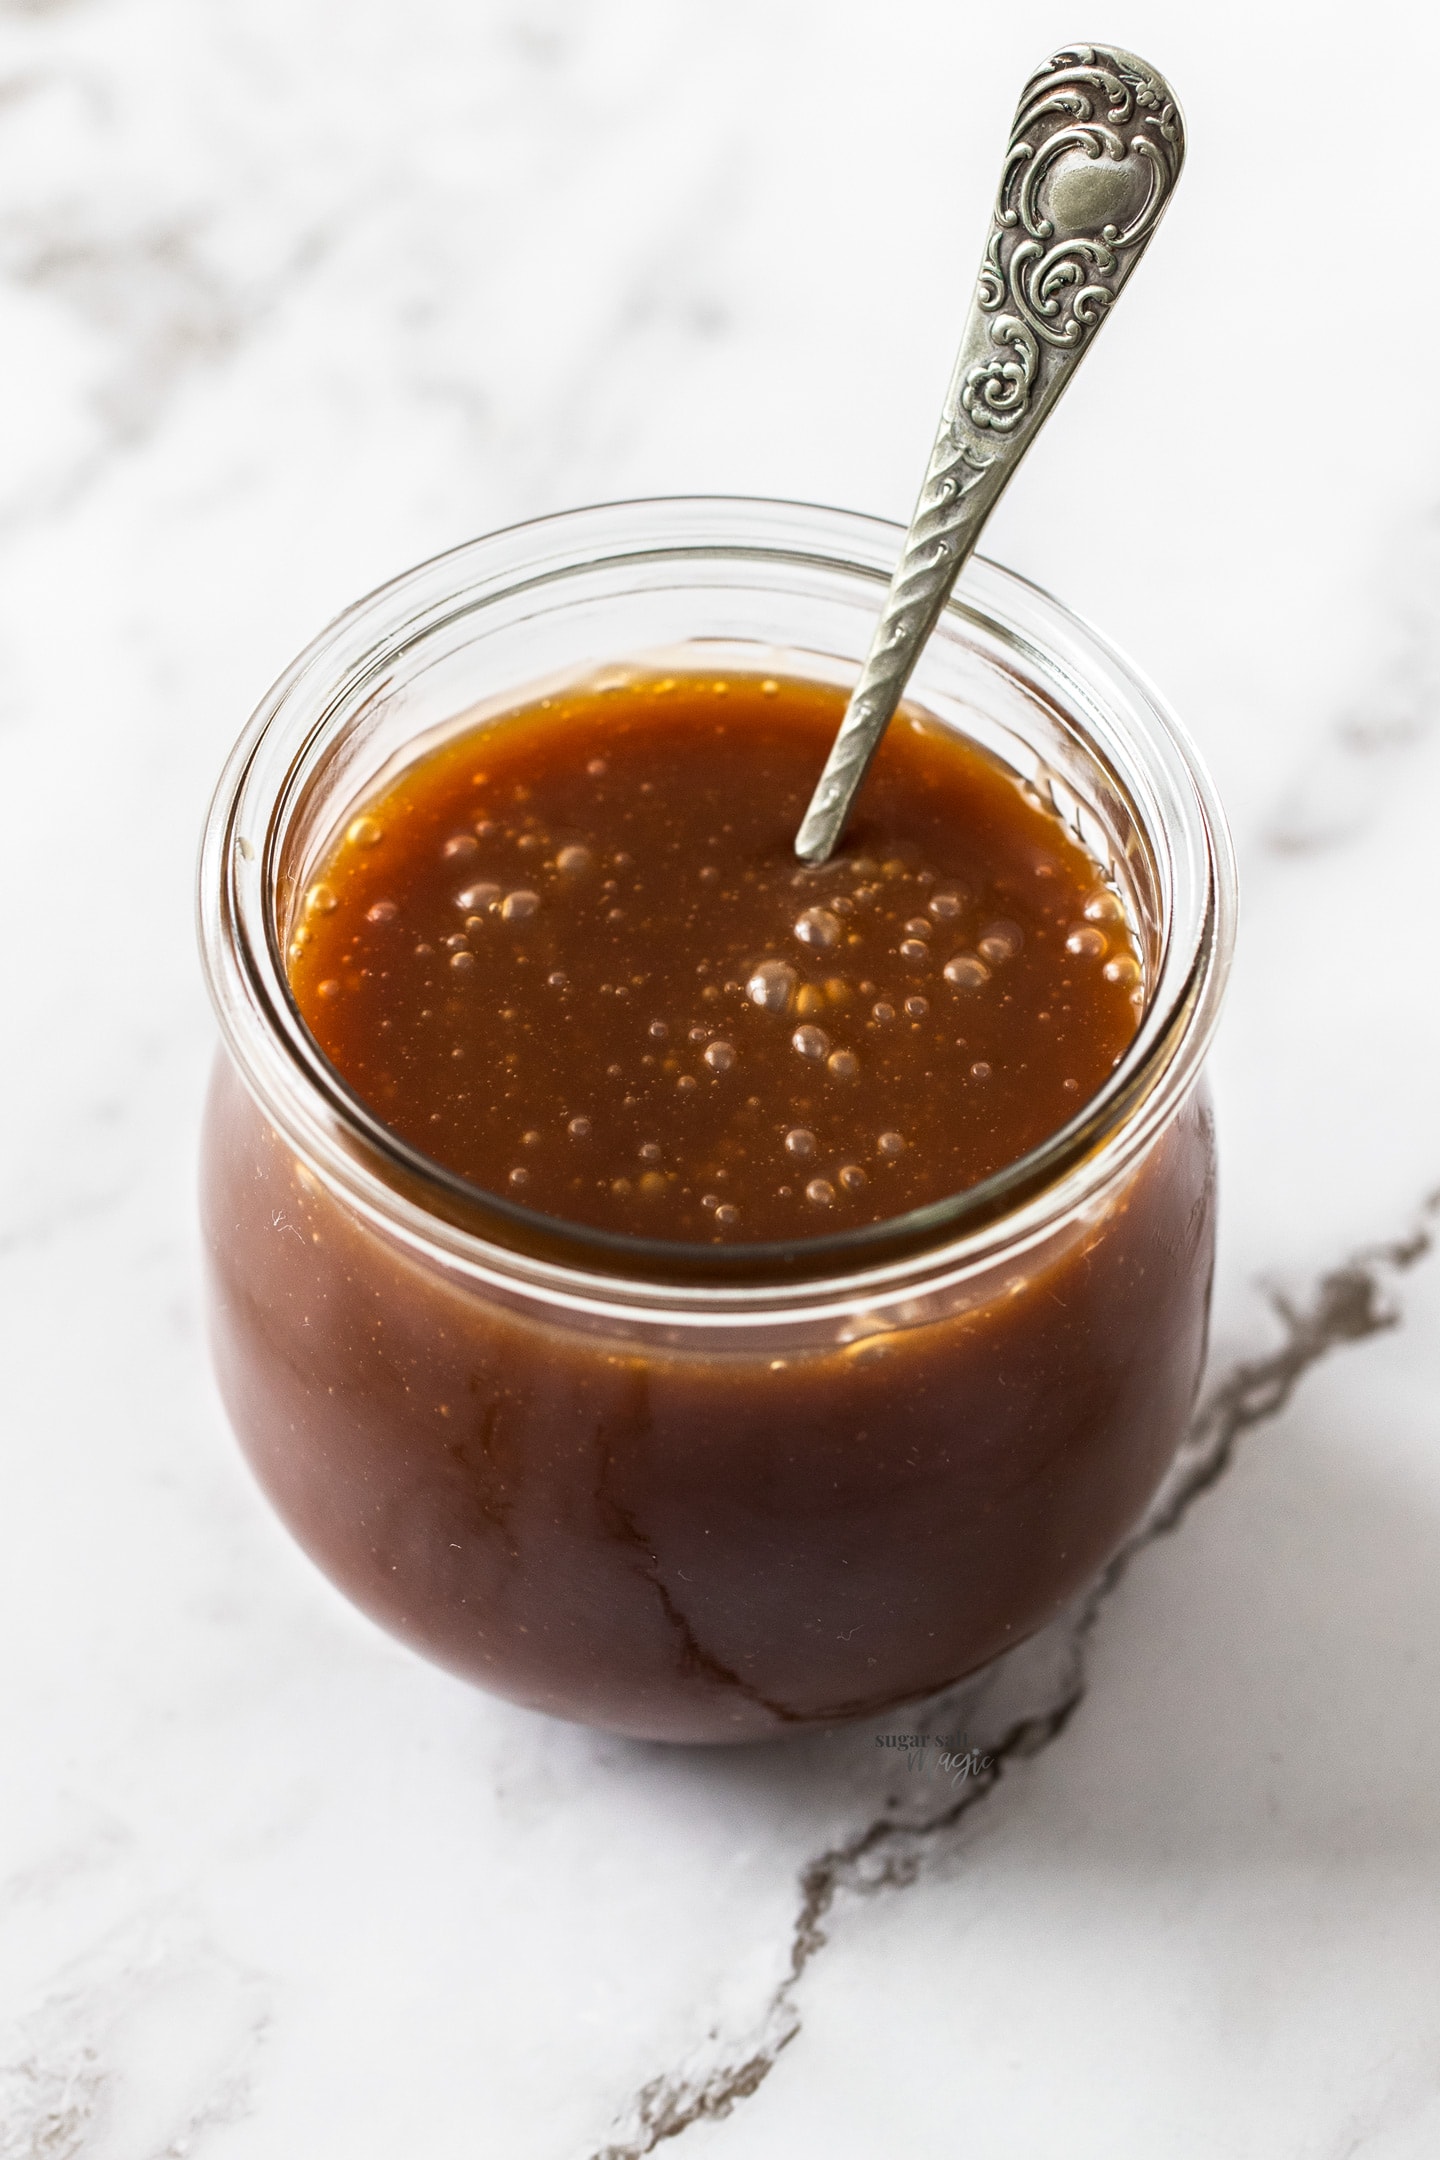 A round glass jar filled with caramel sauce with a spoon sticking out.